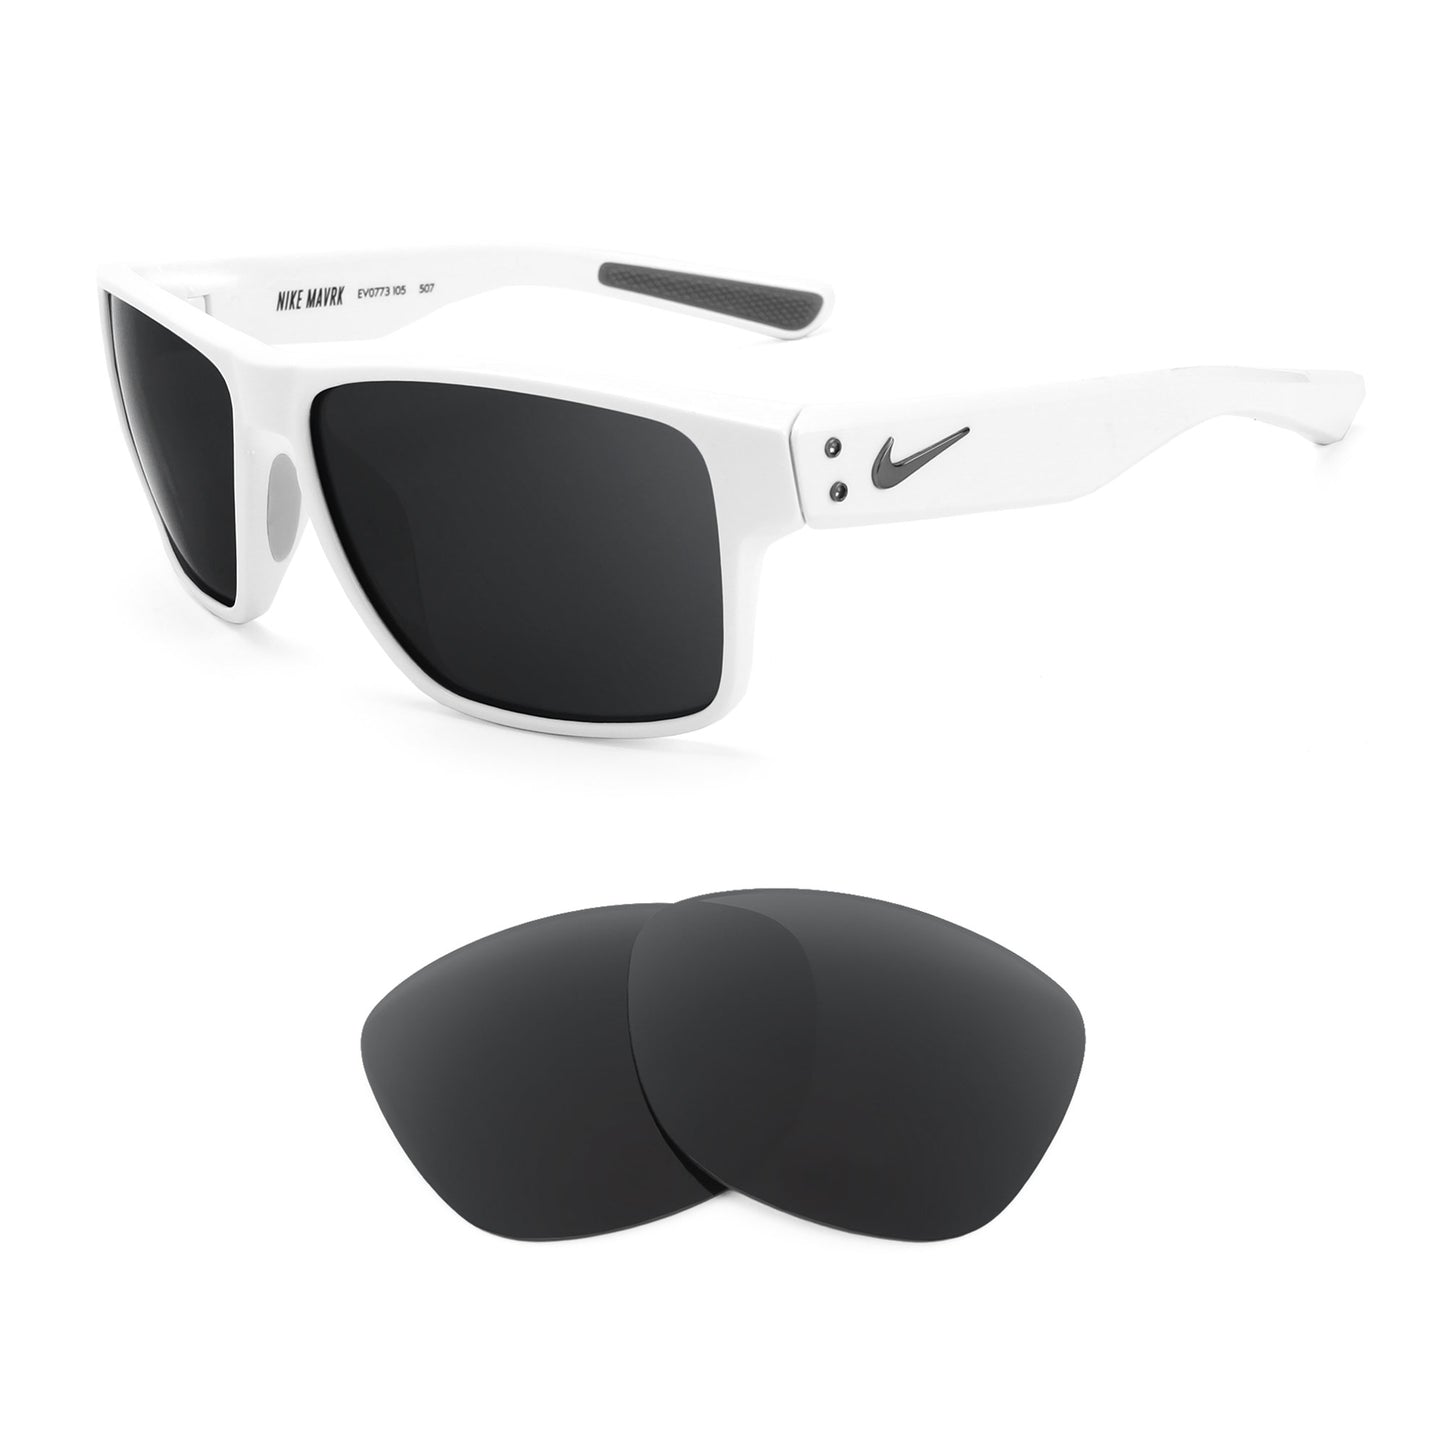 Nike Mavrk sunglasses with replacement lenses